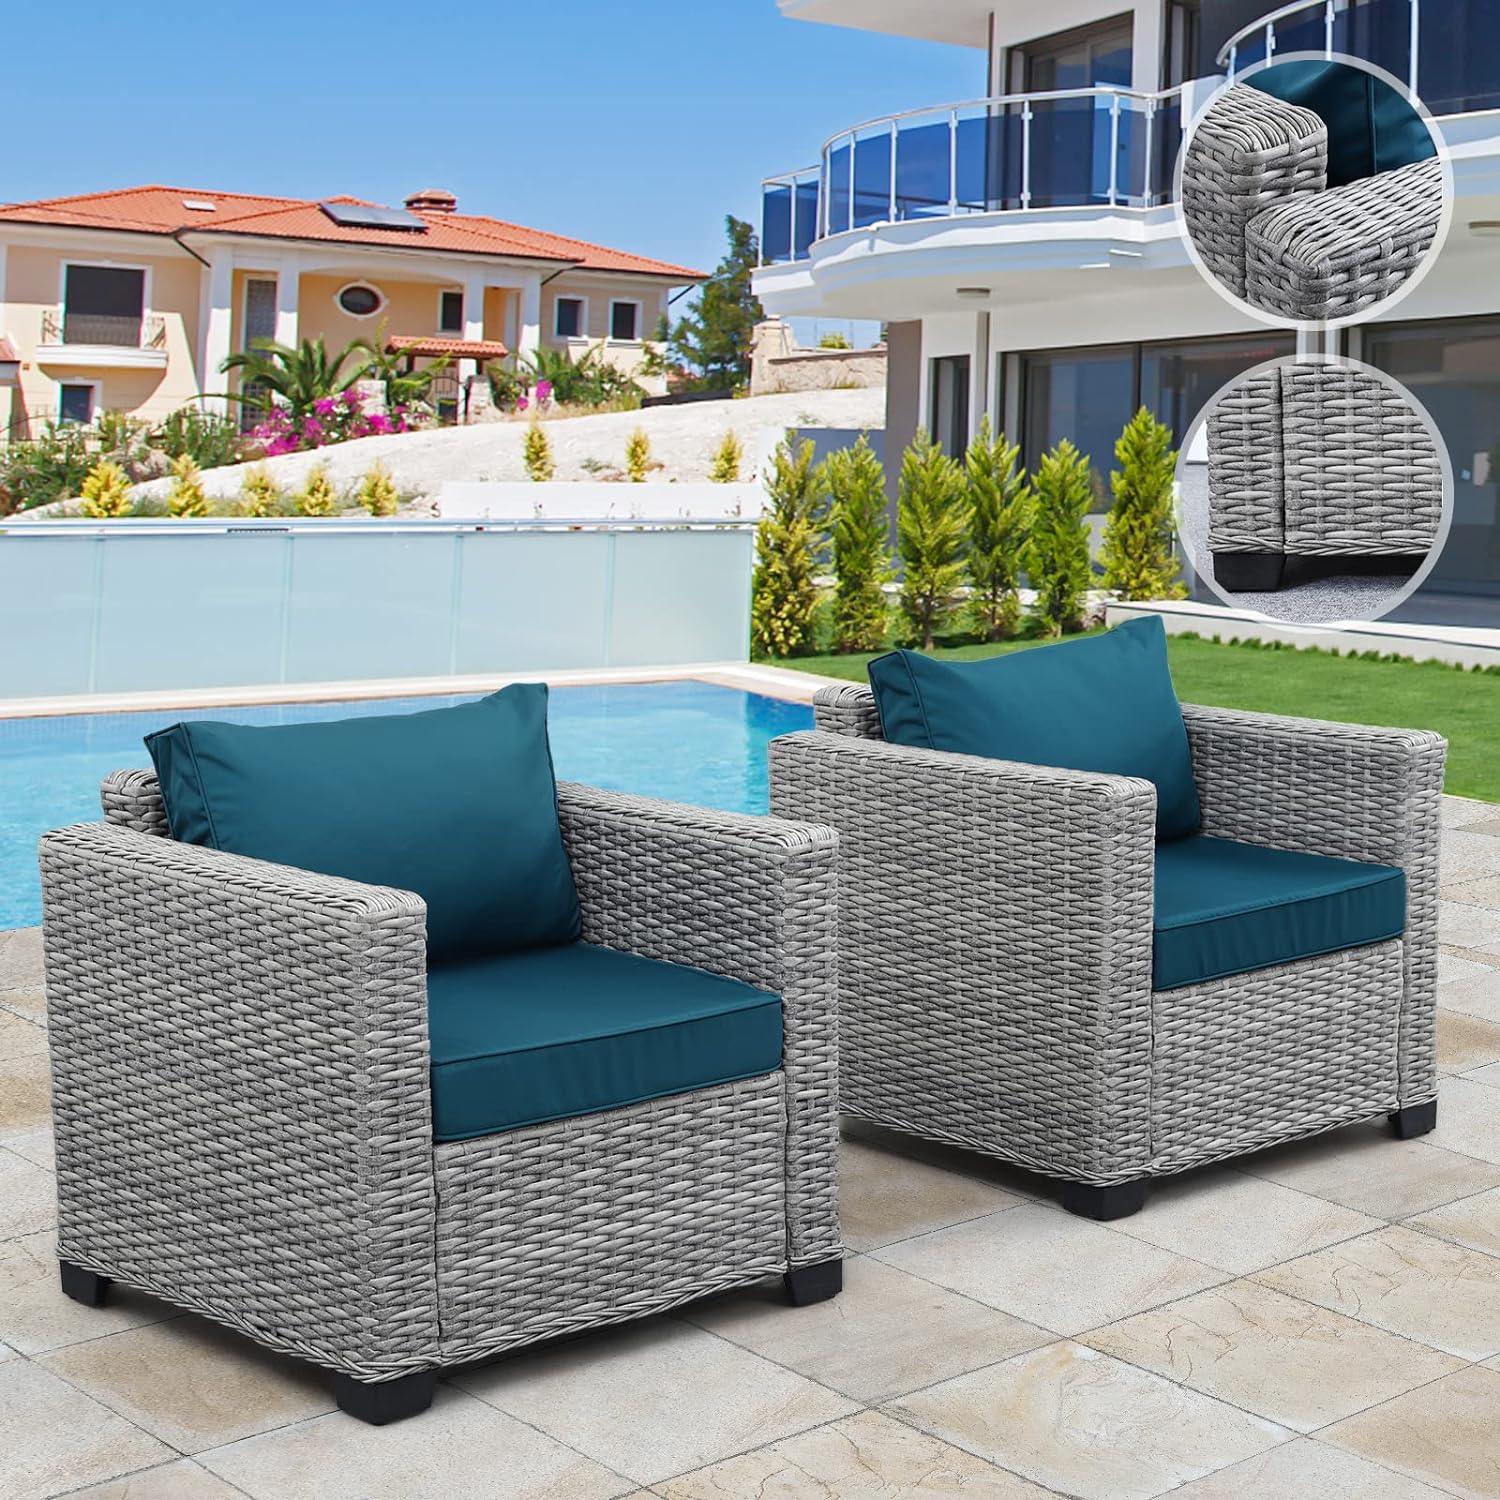 Rattaner Patio Single Sofa Chairs Outdoor Chairs Set of 2 Outdoor Sofa Accent Chair Outdoor Furniture Club Chair with Anti-Slip Cushions and Waterproof Cover, Peacock Blue